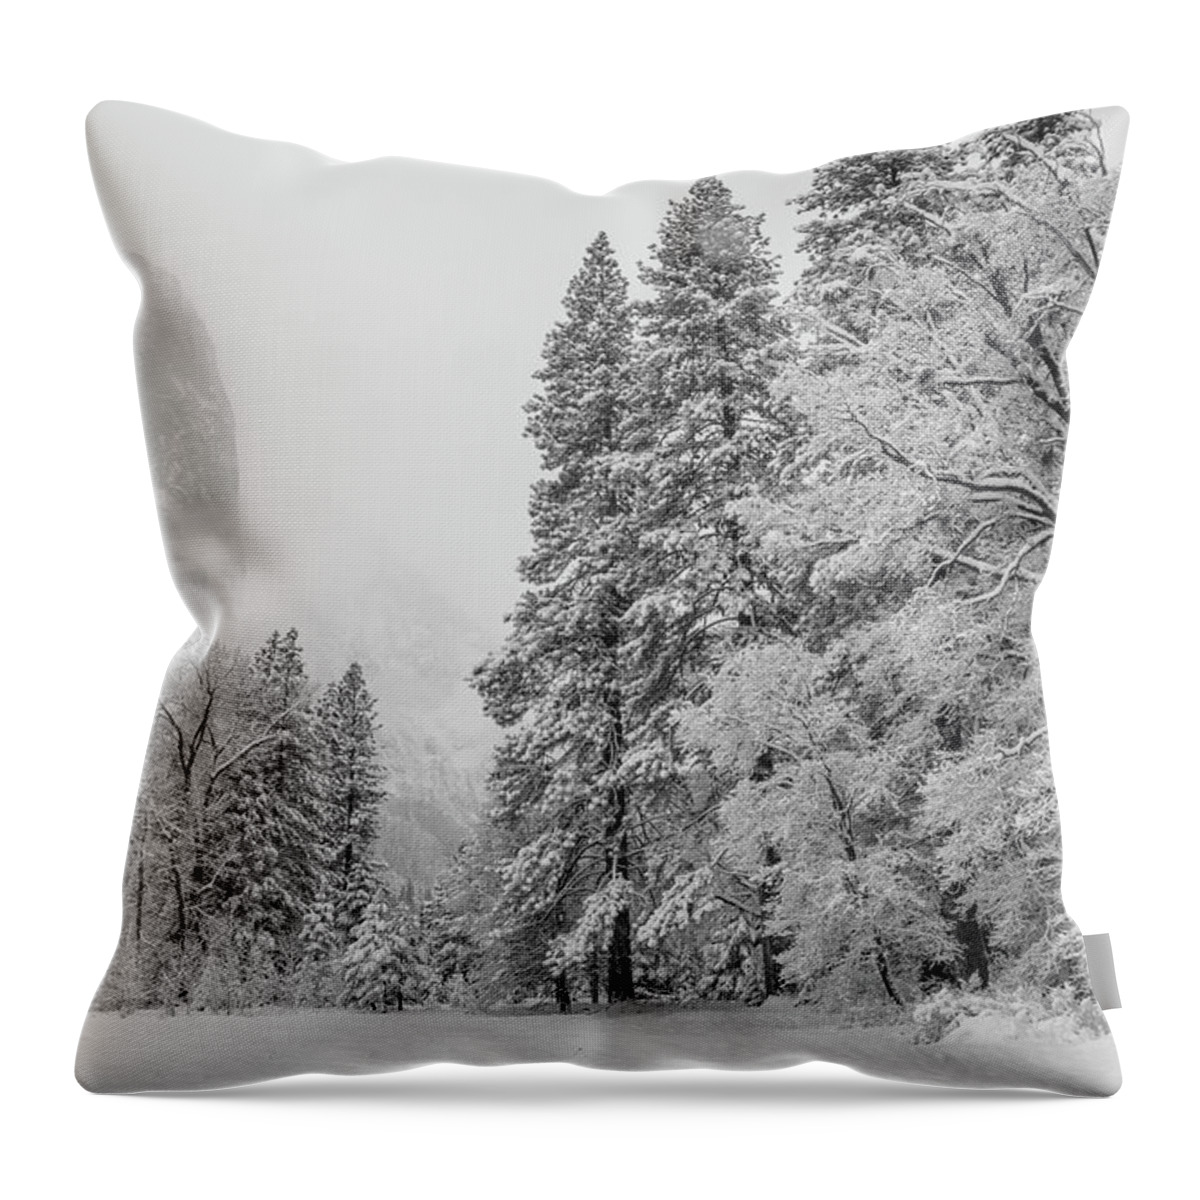 Landscape Throw Pillow featuring the photograph Frigid by Jonathan Nguyen